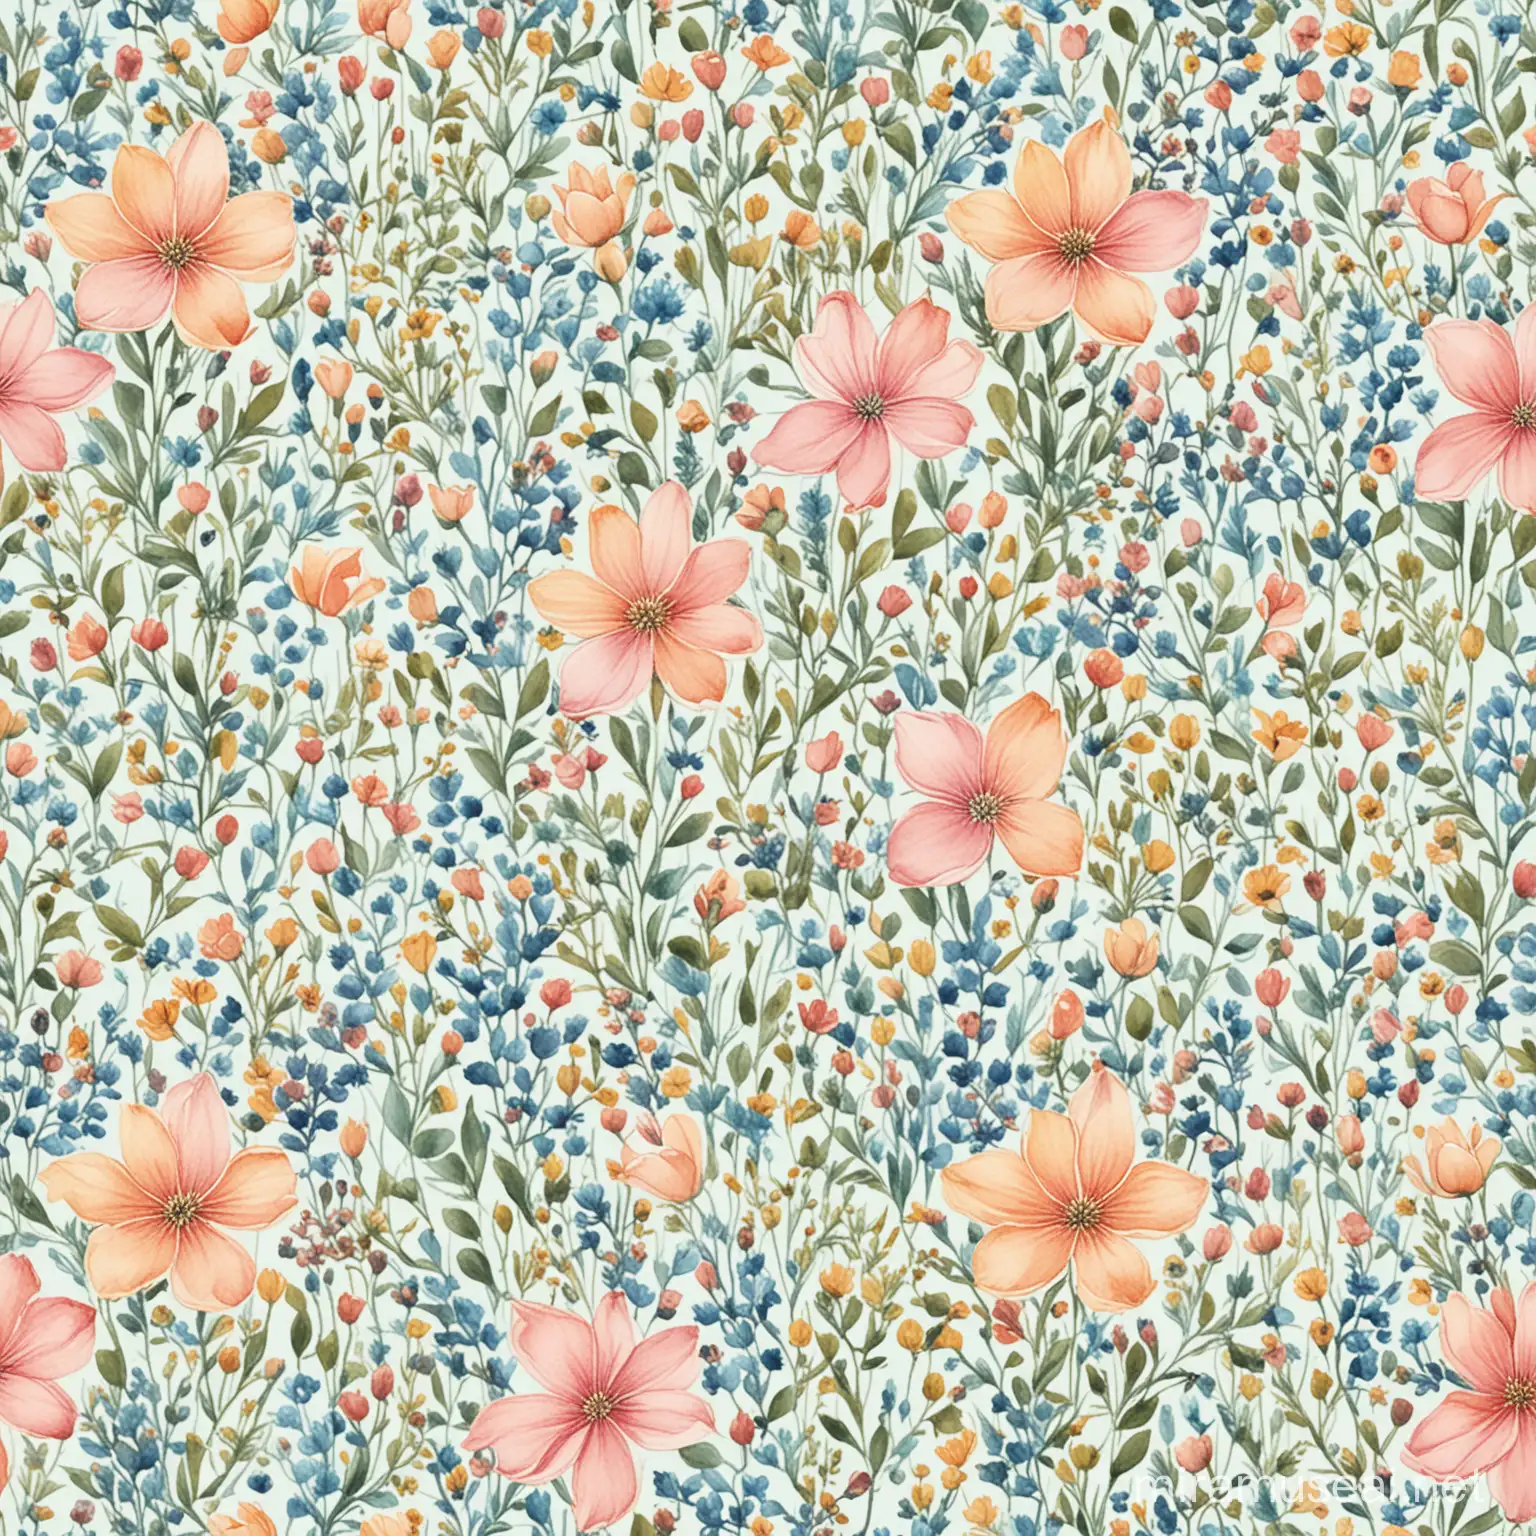 asymmetric repeatable pattern of  small watercolor flowers in pastel colors, liberty prints style